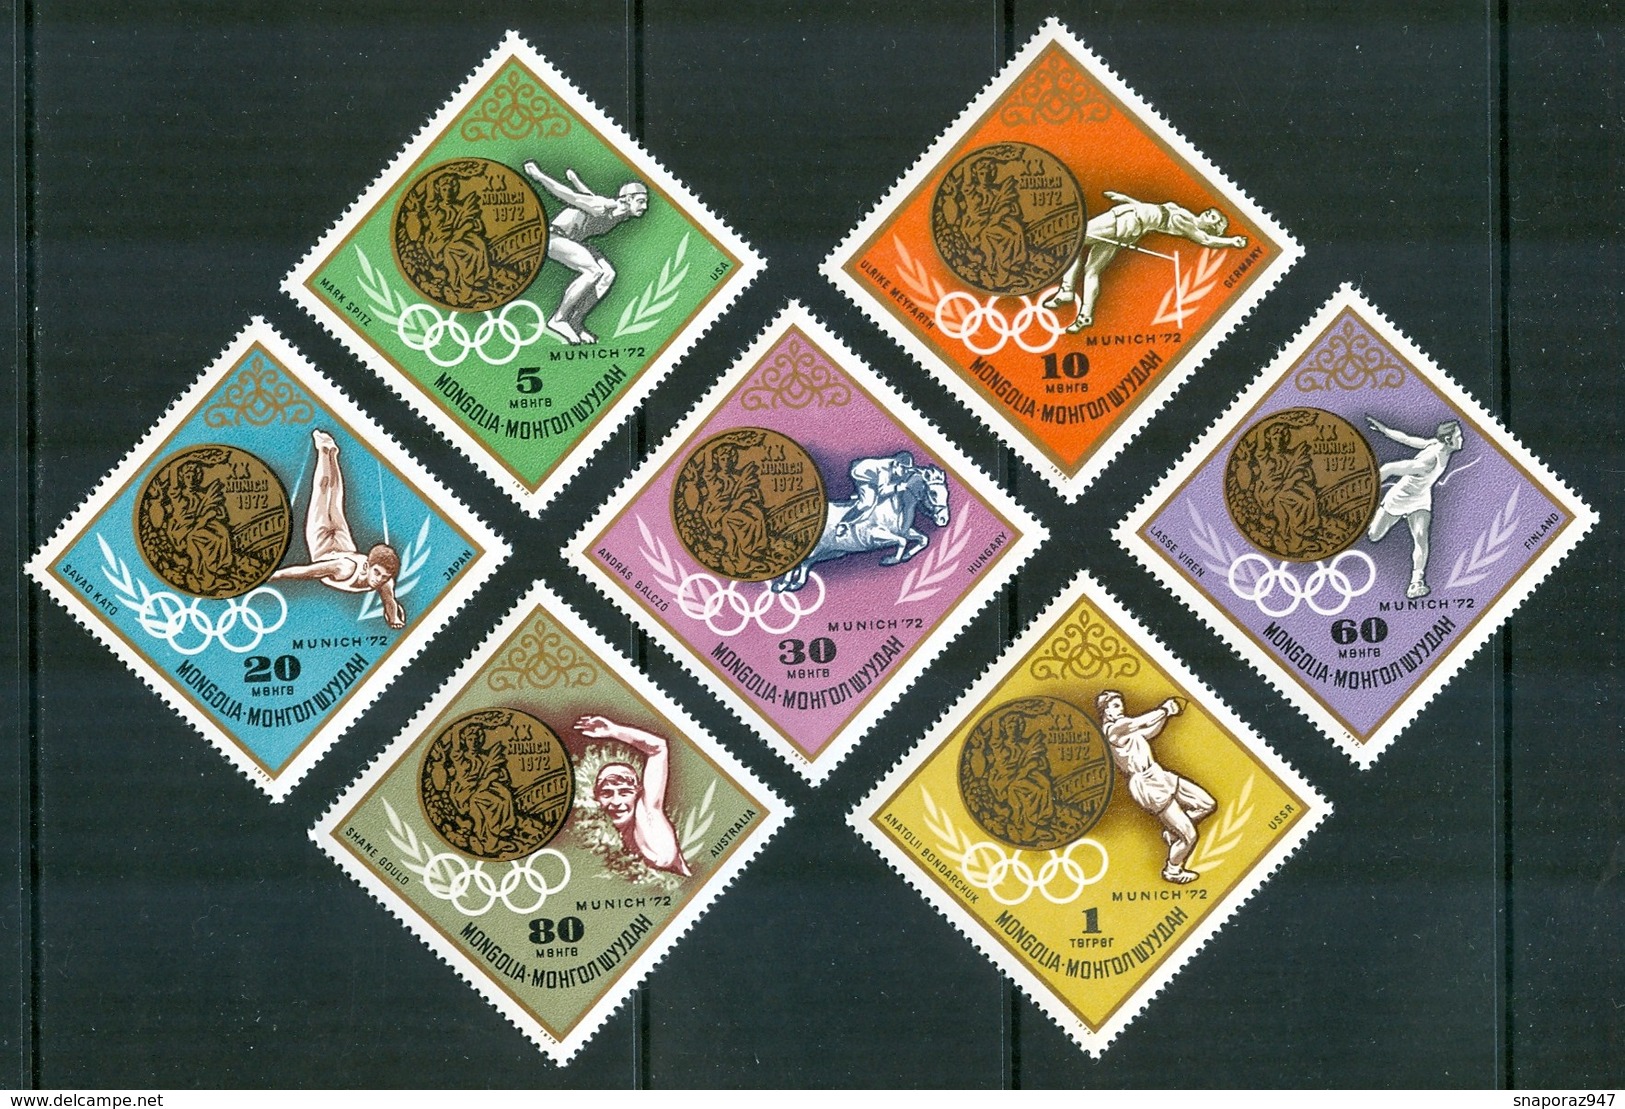 1972 Mongolia "Munich 72" Medals Winner Olimpiadi Olympics Games Jeux Olympiques MNH** Lux46 - Mongolia